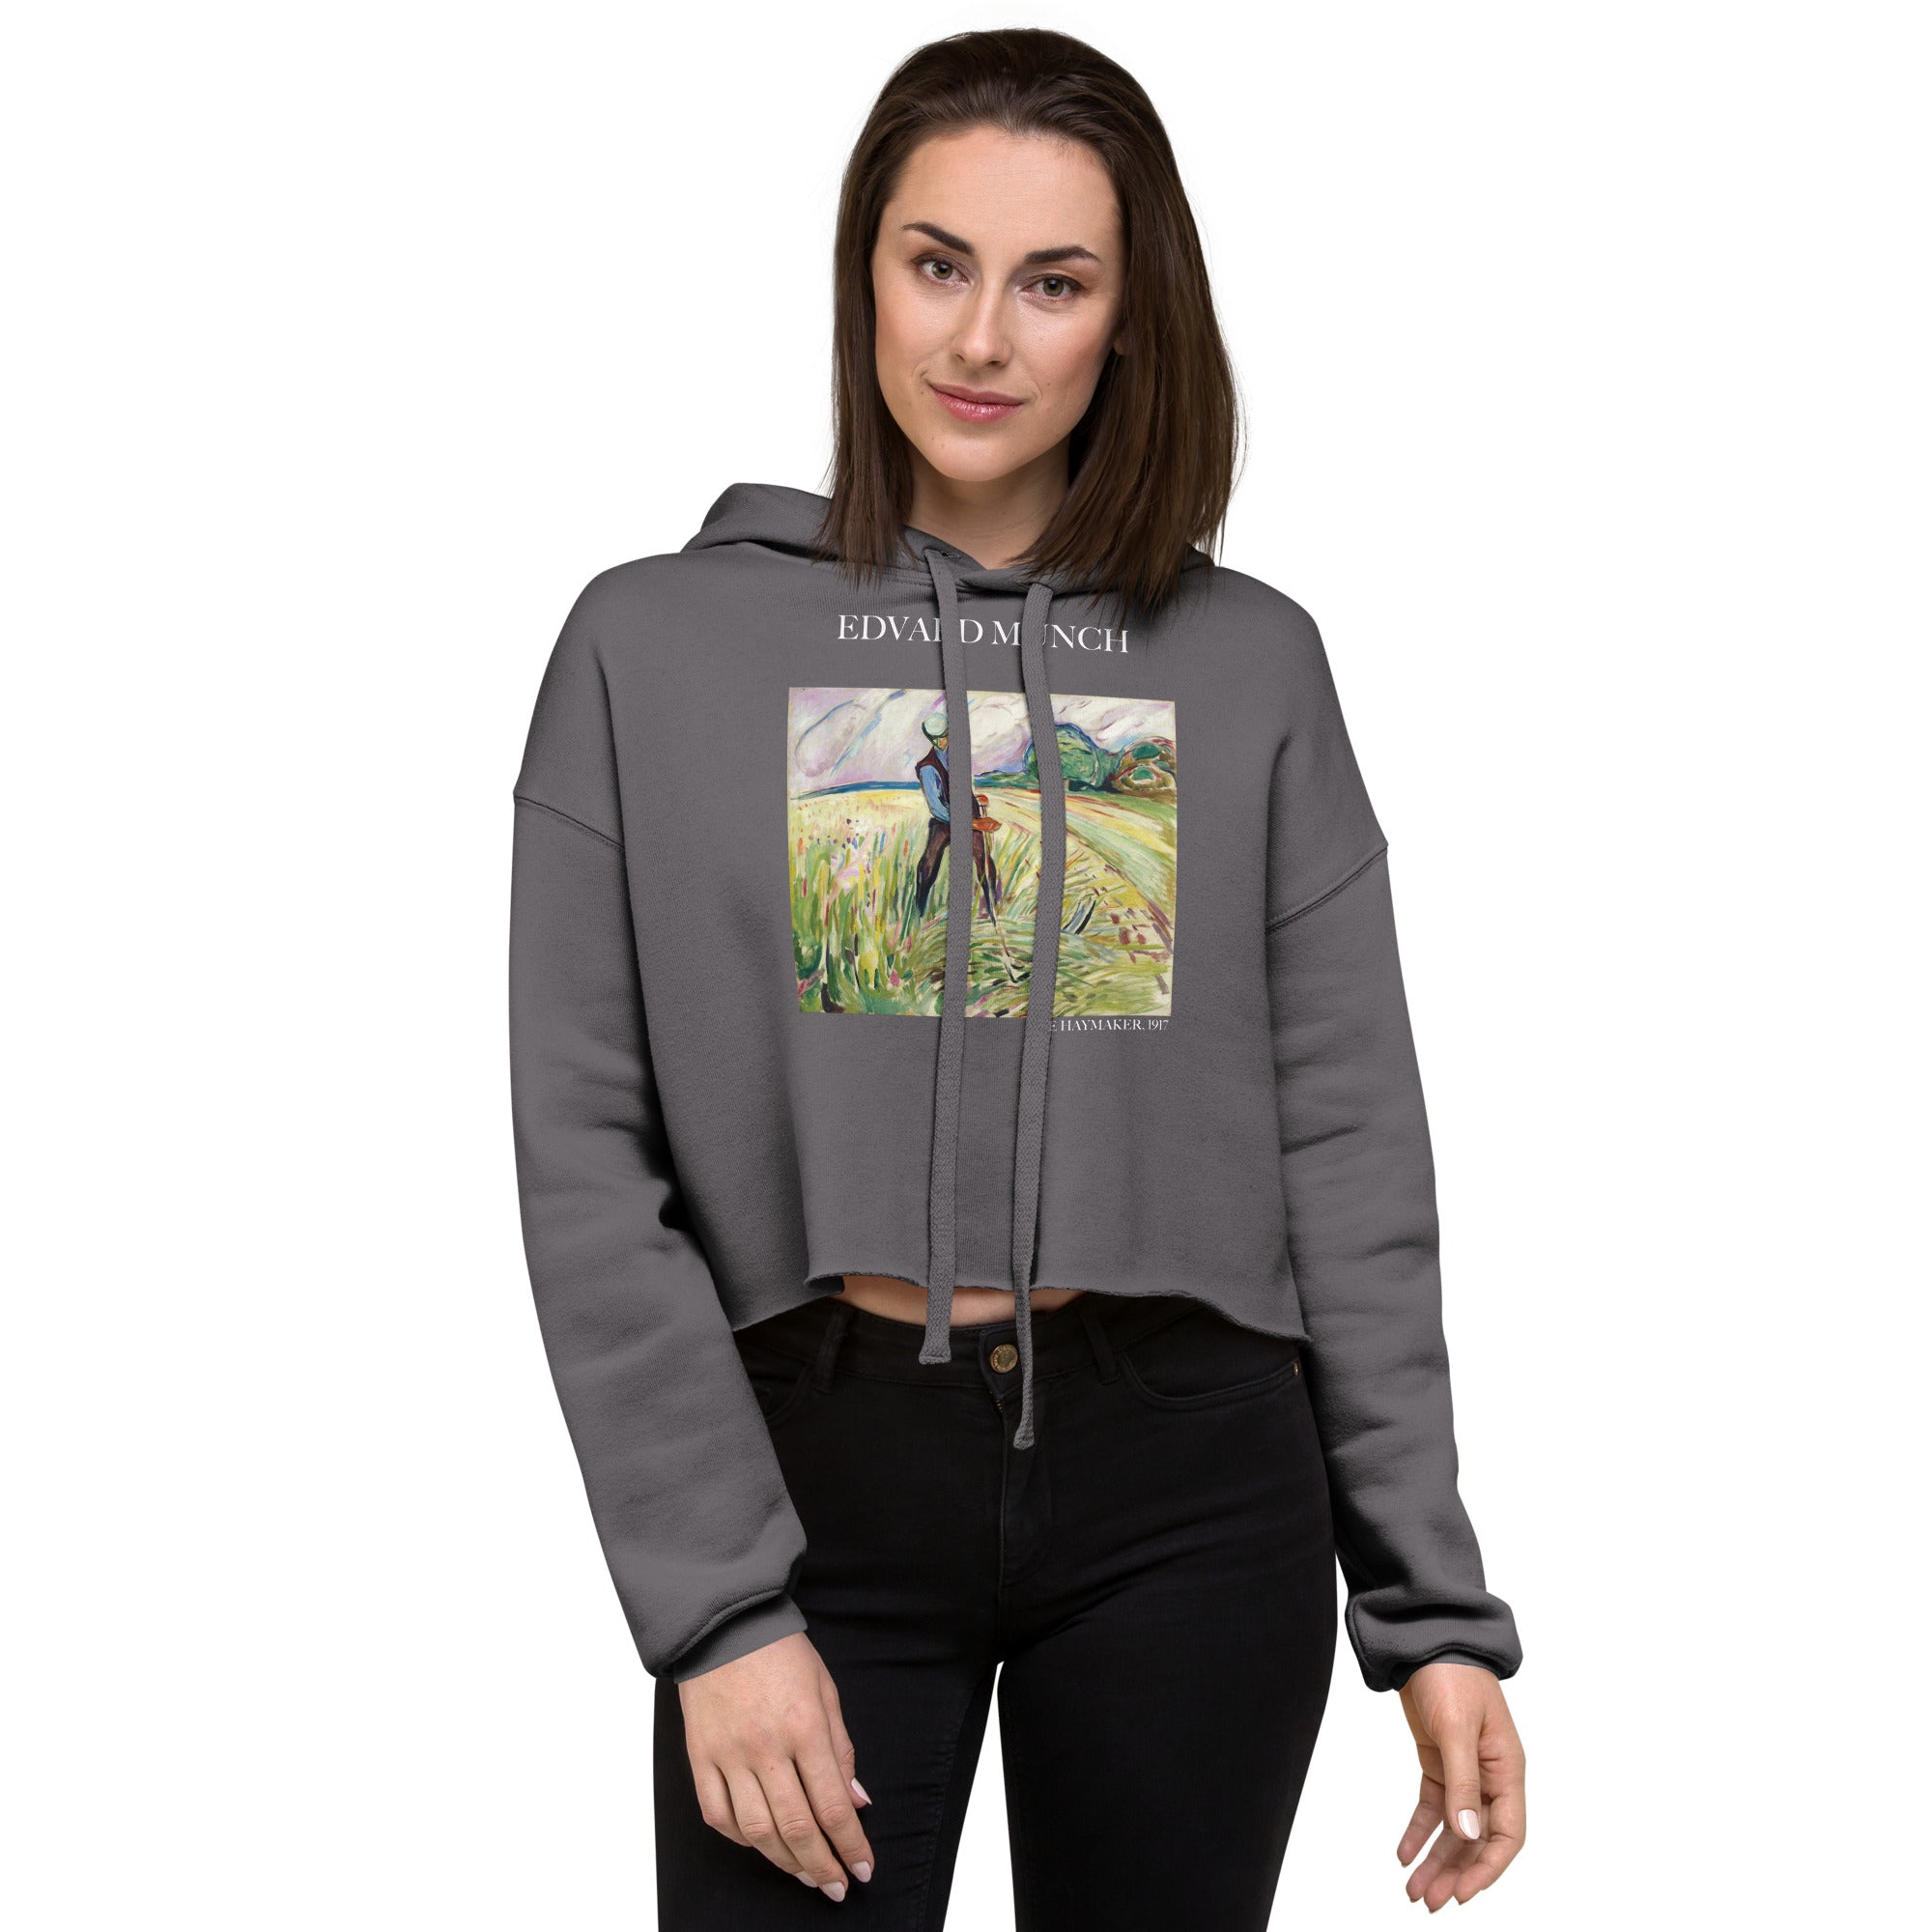 Edvard Munch 'The Haymaker' Famous Painting Cropped Hoodie | Premium Art Cropped Hoodie